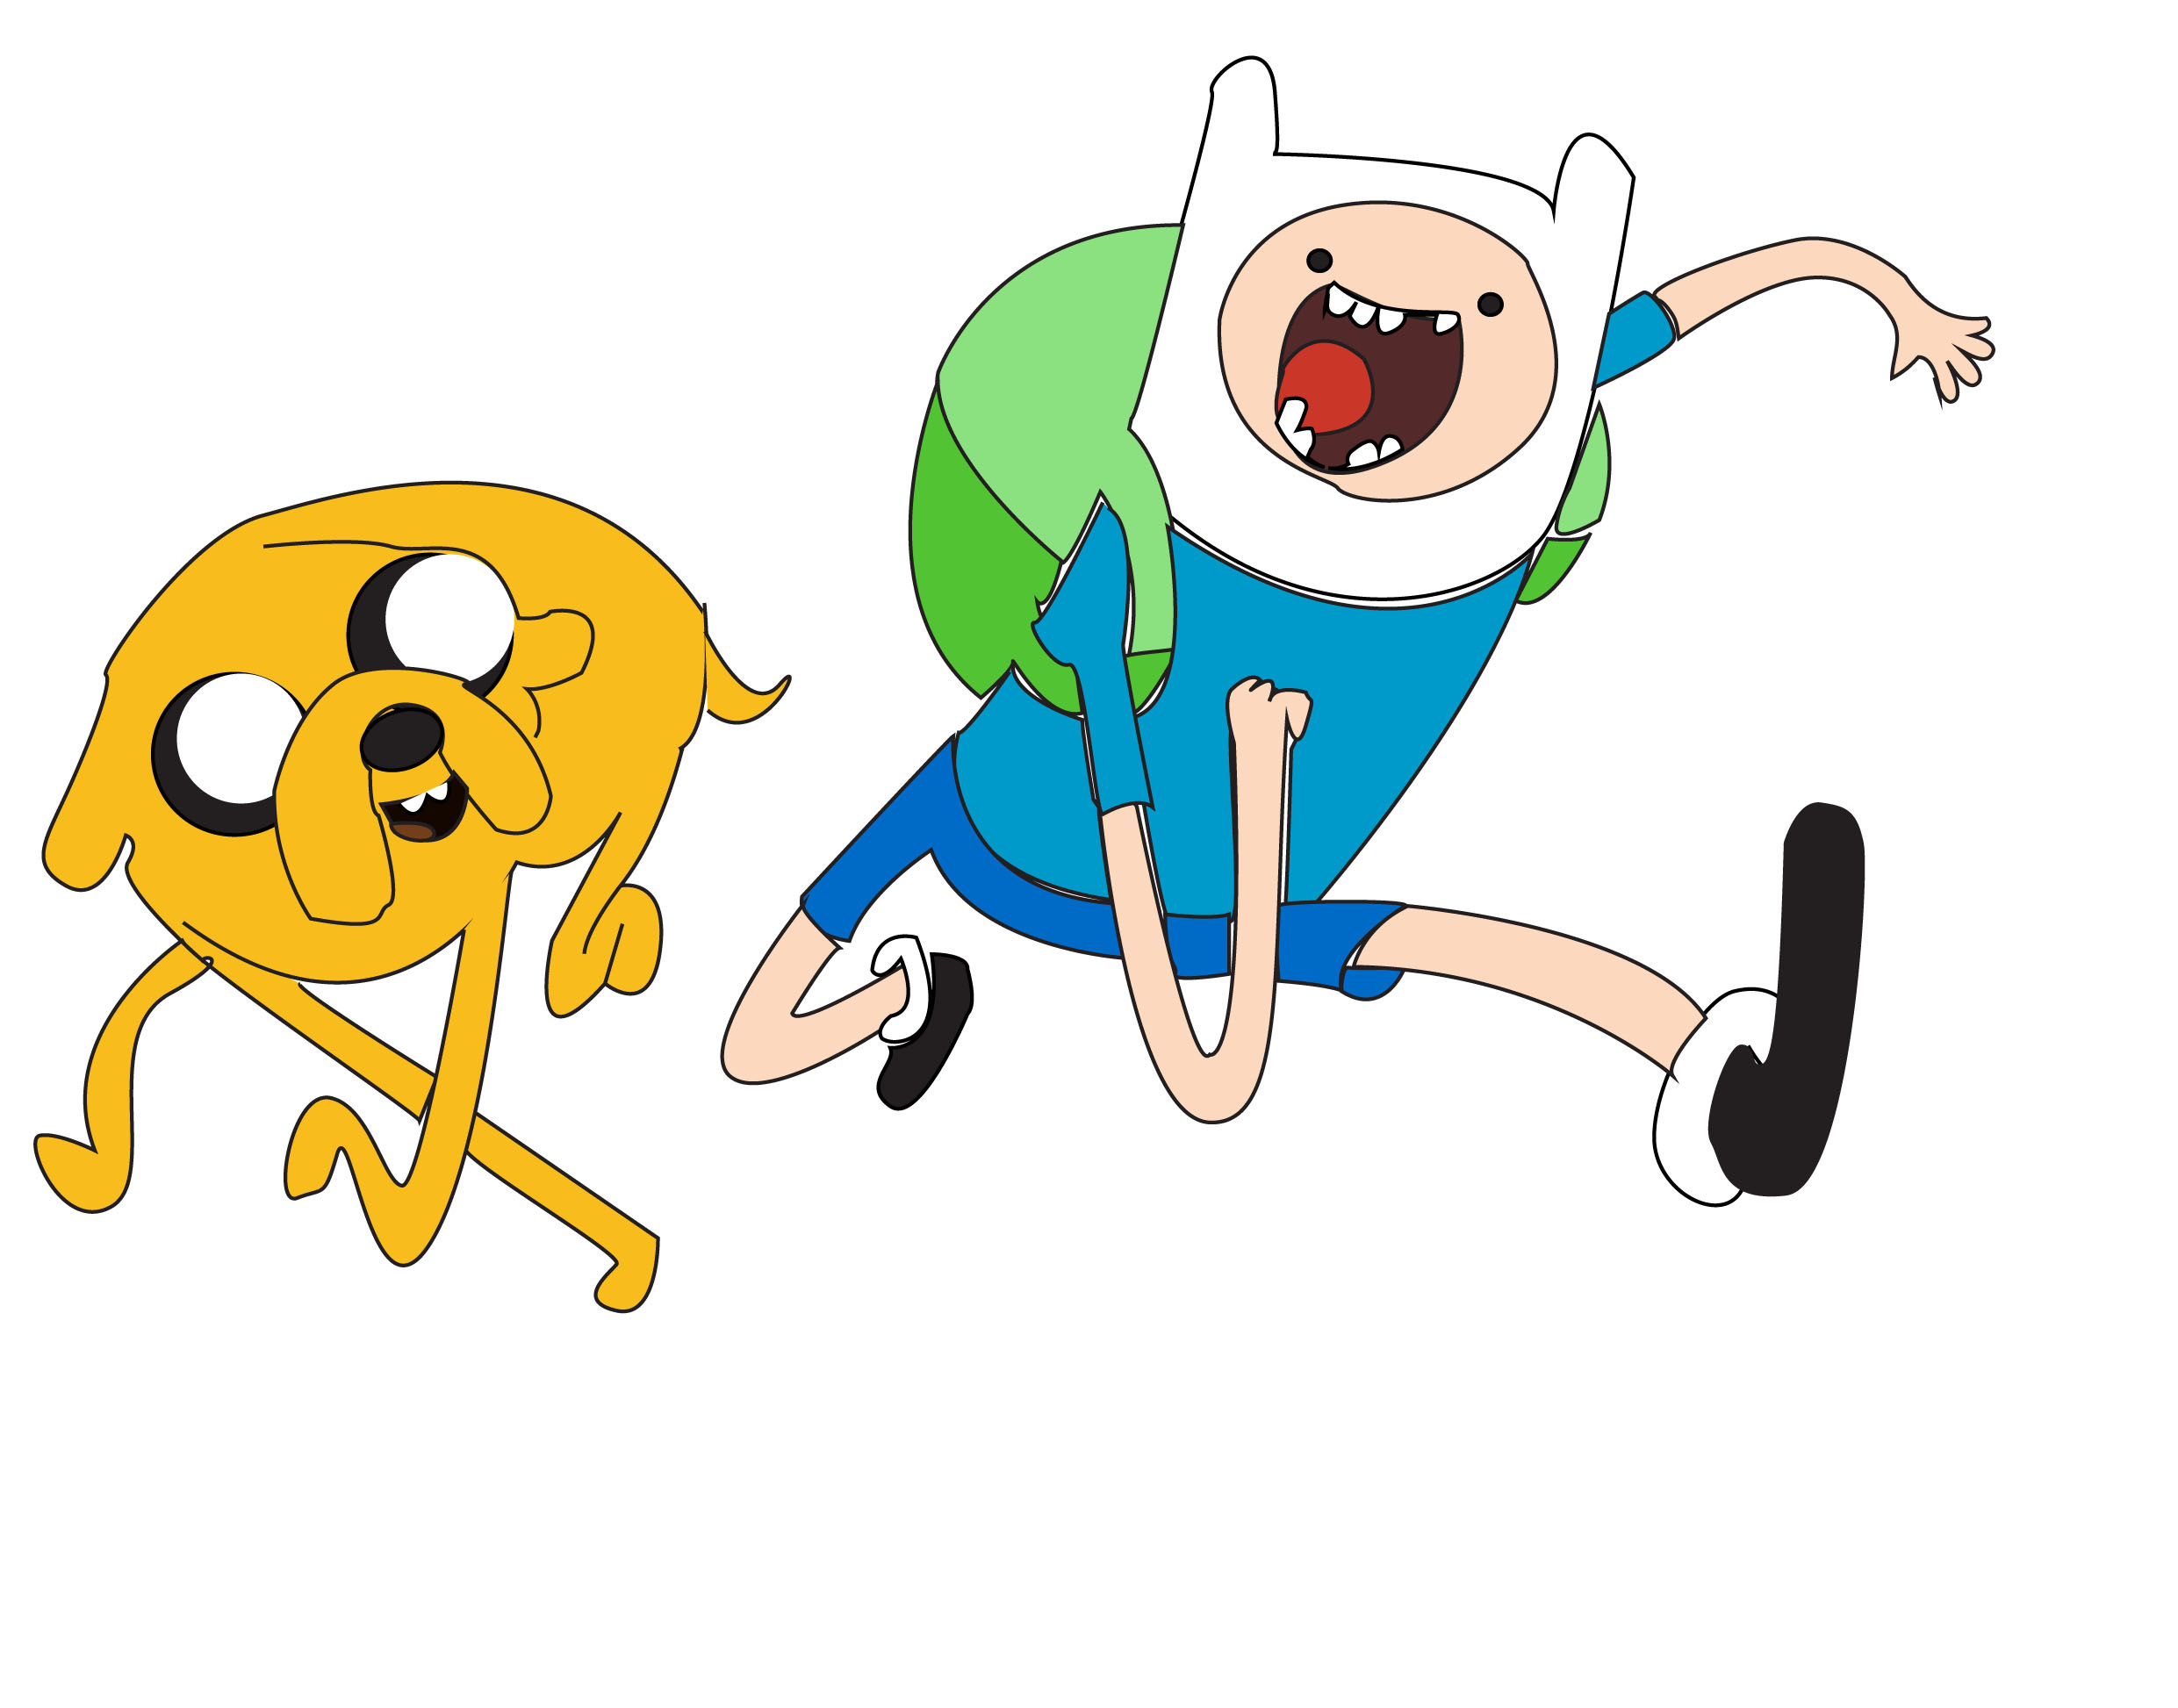 Adventure Time with Finn and Jake wallpaper, Cartoon wallpapers, Finn and Jake wallpapers, Adventure Time iPhone wallpaper, 2490x1950 HD Desktop